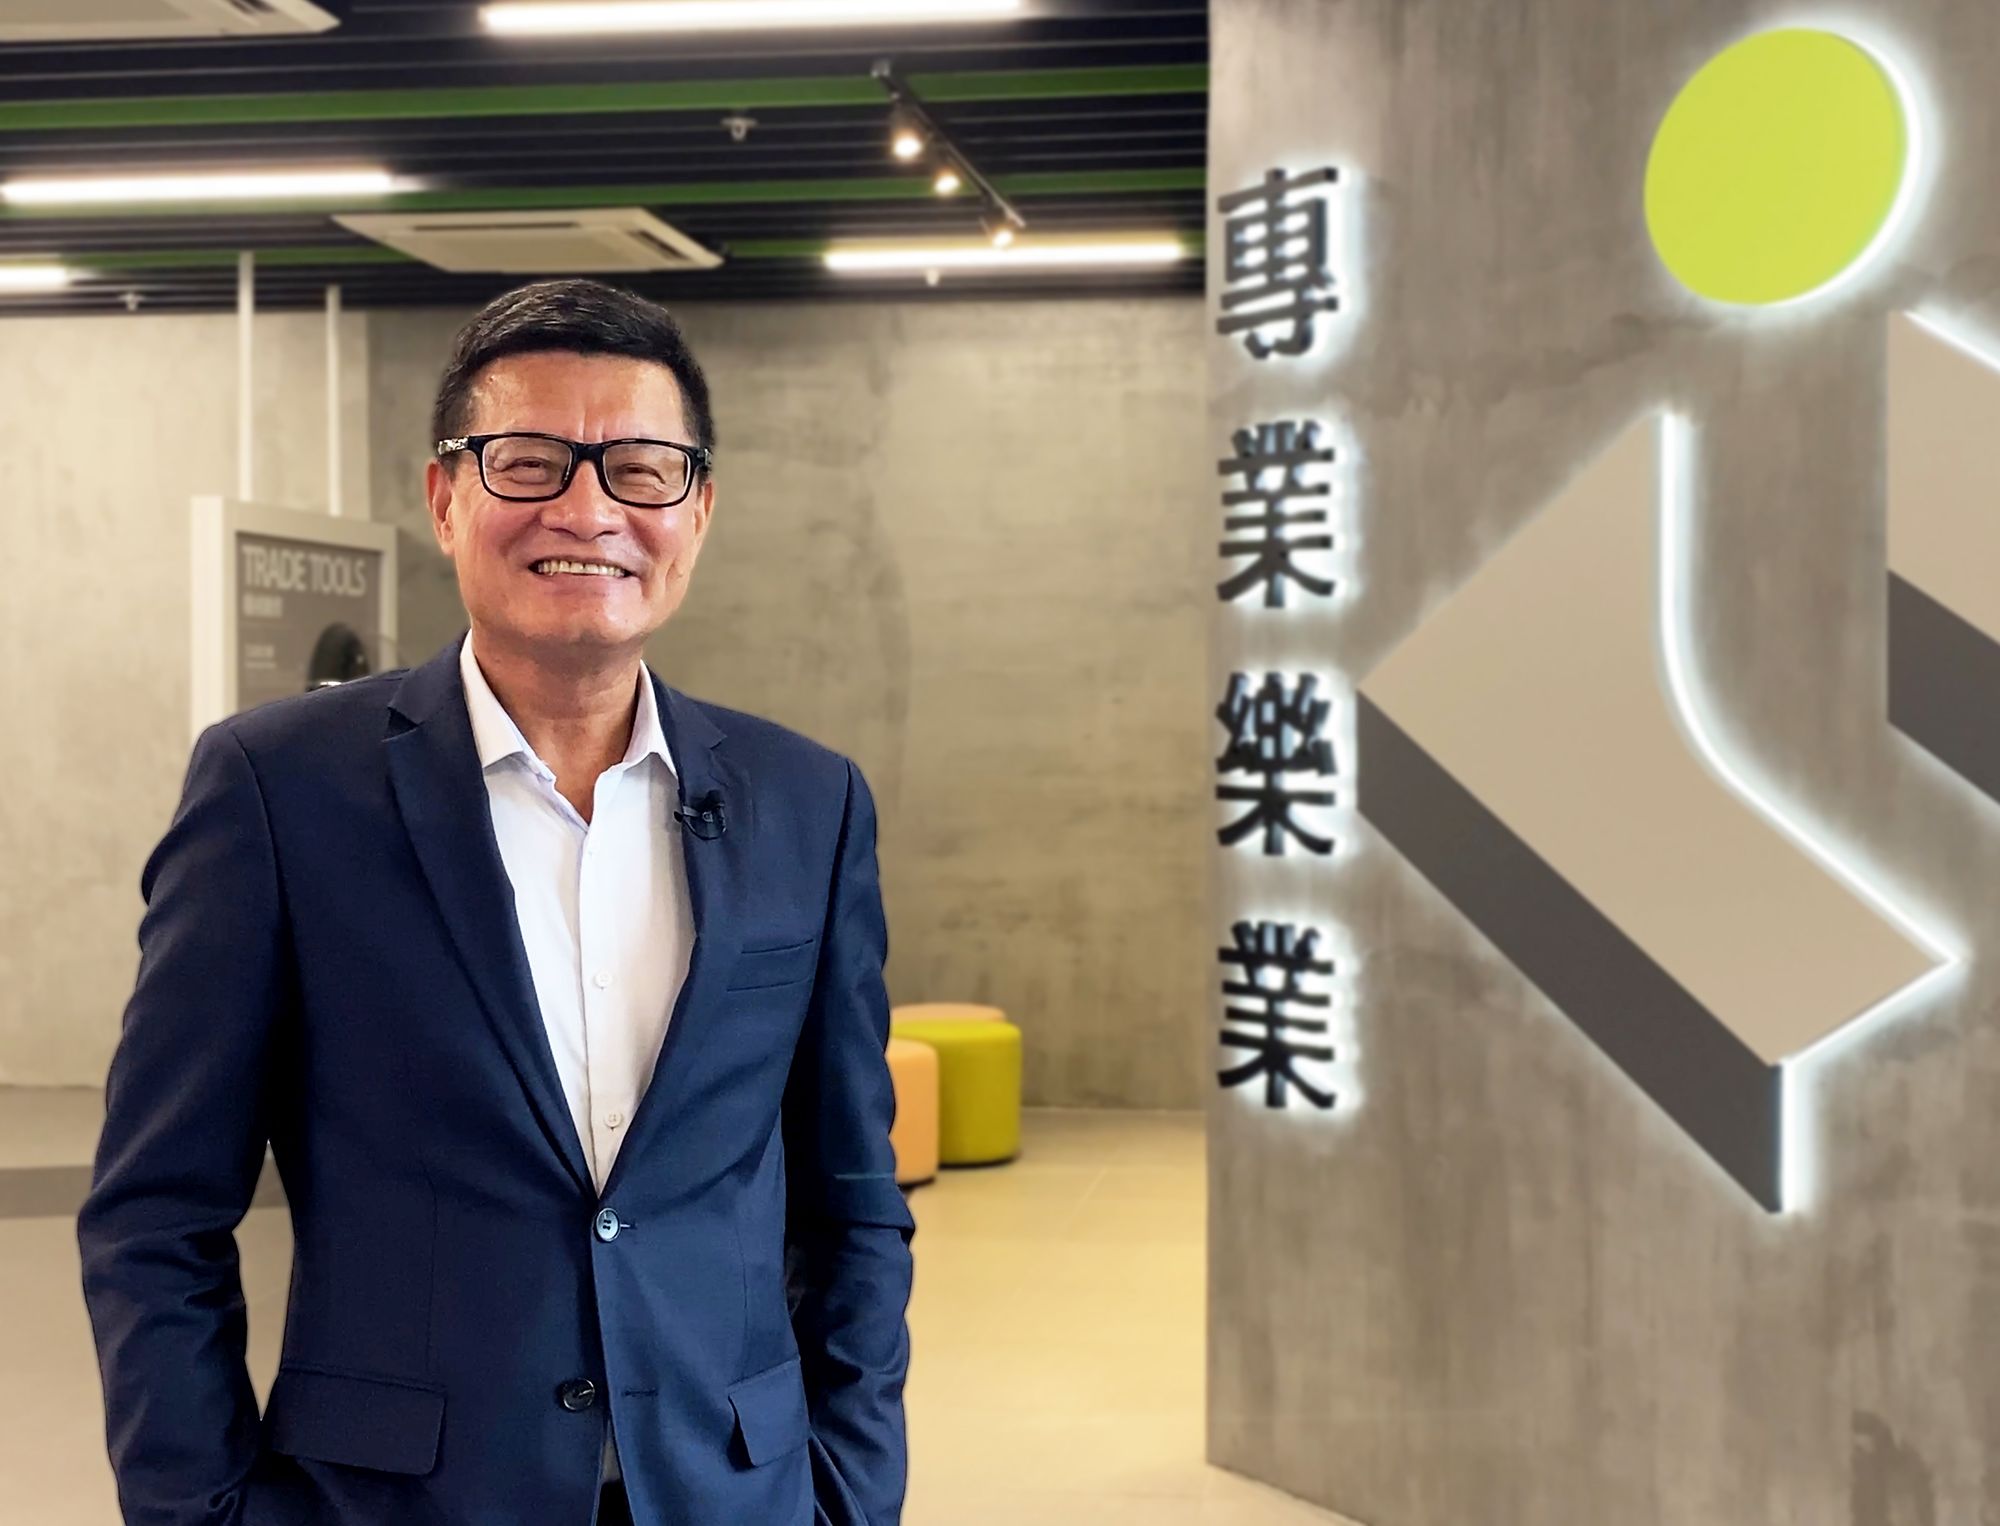 Mr CHENG Ting-ning, Albert, Executive Director of Construction Industry Council (CIC), says that the Hong Kong Institute of Construction (HKIC) of CIC has actively incorporated elements of innovative technologies into their courses to nurture talents to become knowledge-based and tech-savvy practitioners.  